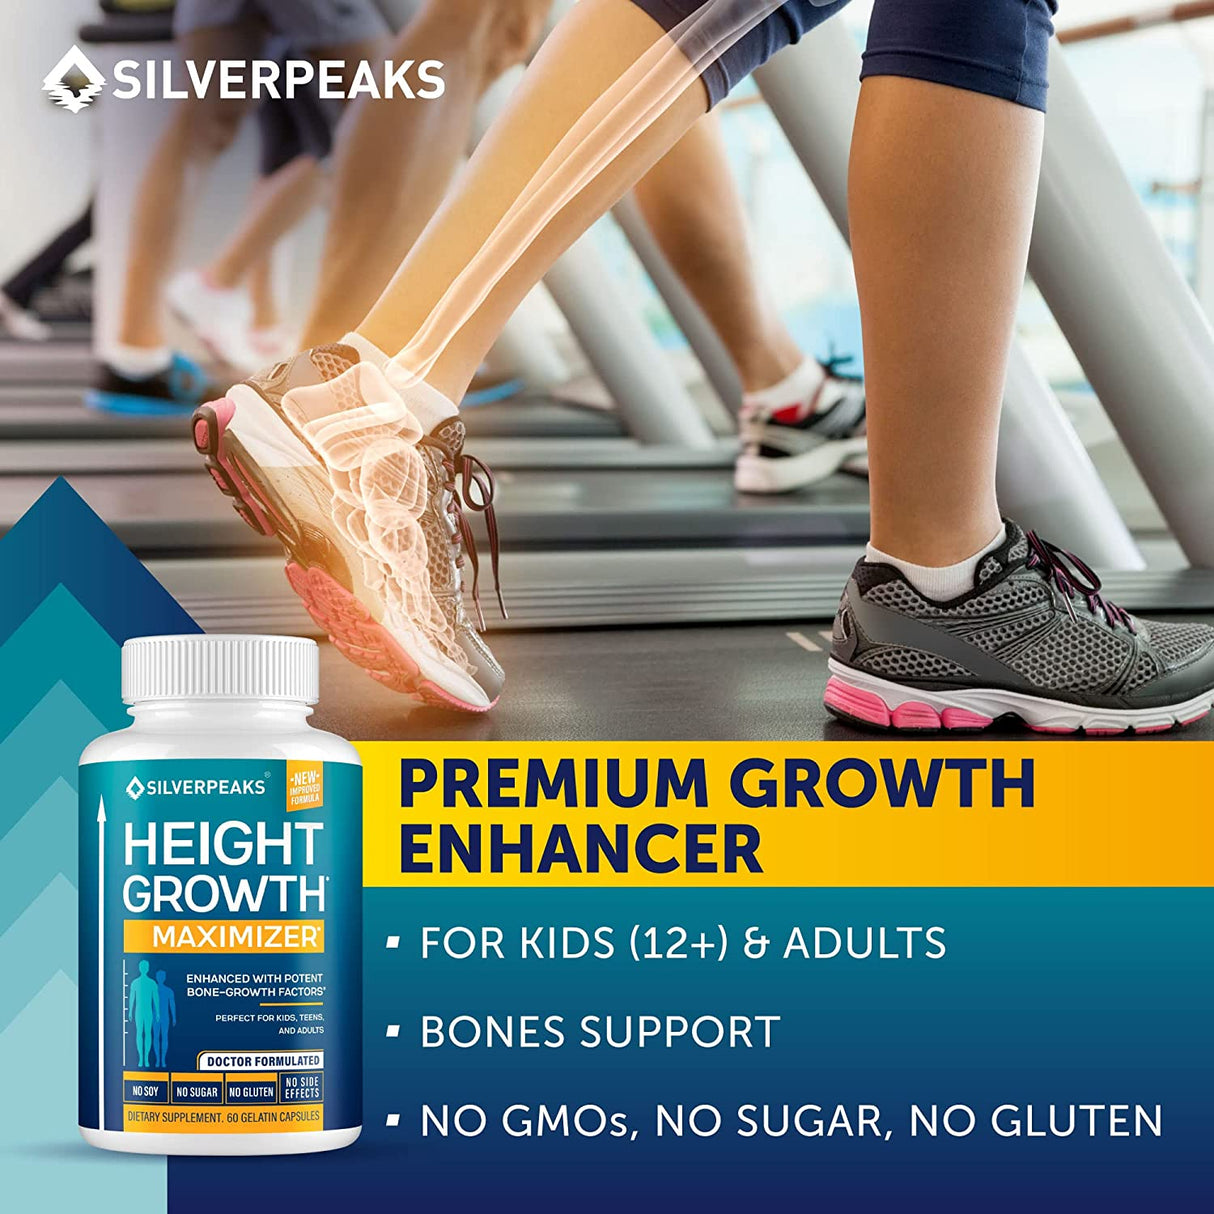 Silver Peaks Height Growth Maximizer 60 Capsulas